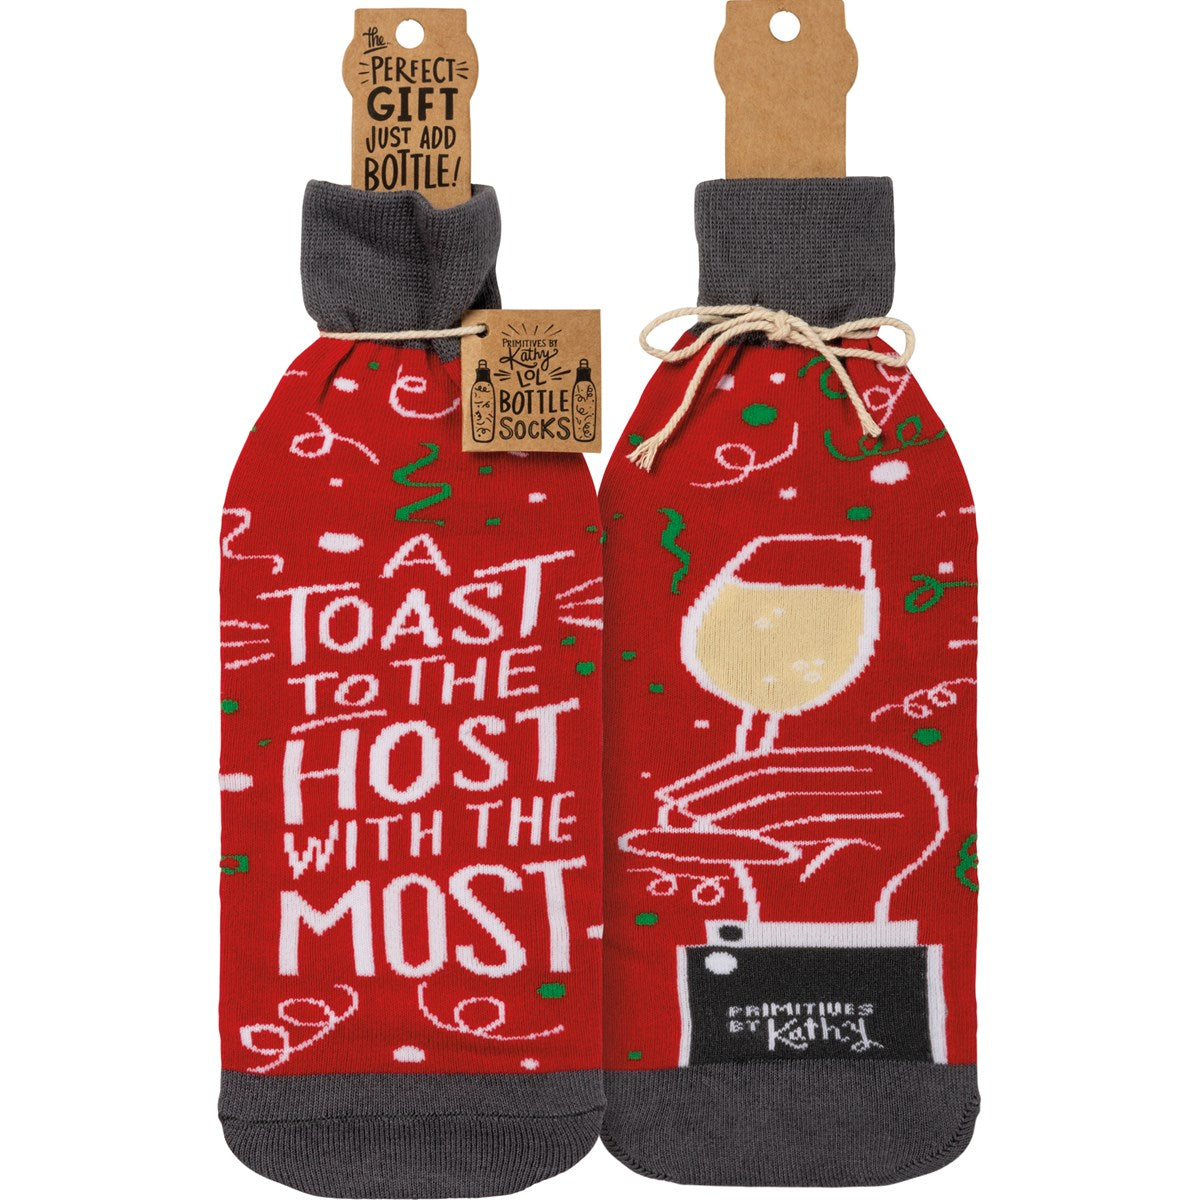 Bottle Sock - A Toast To The Host With The Most